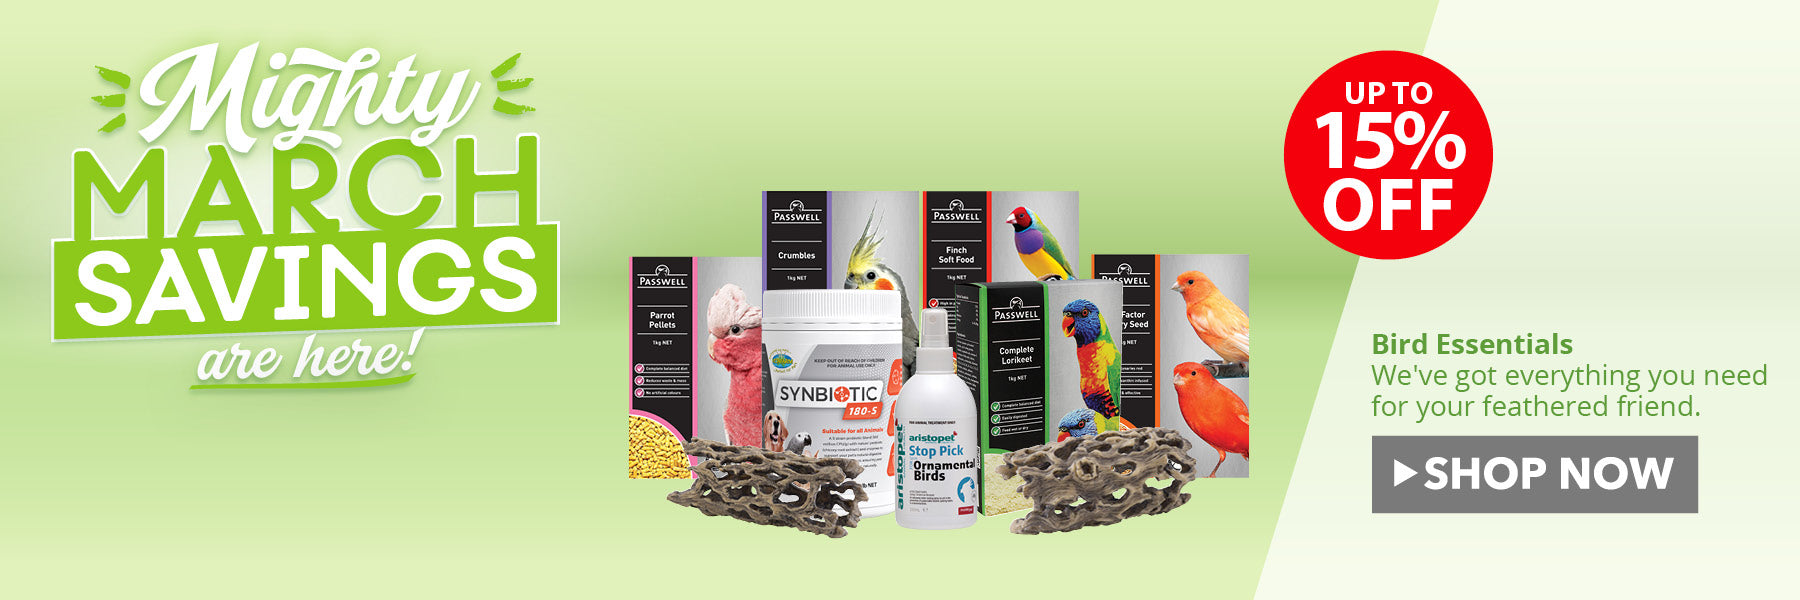 Essentials for your bird ON SALE NOW